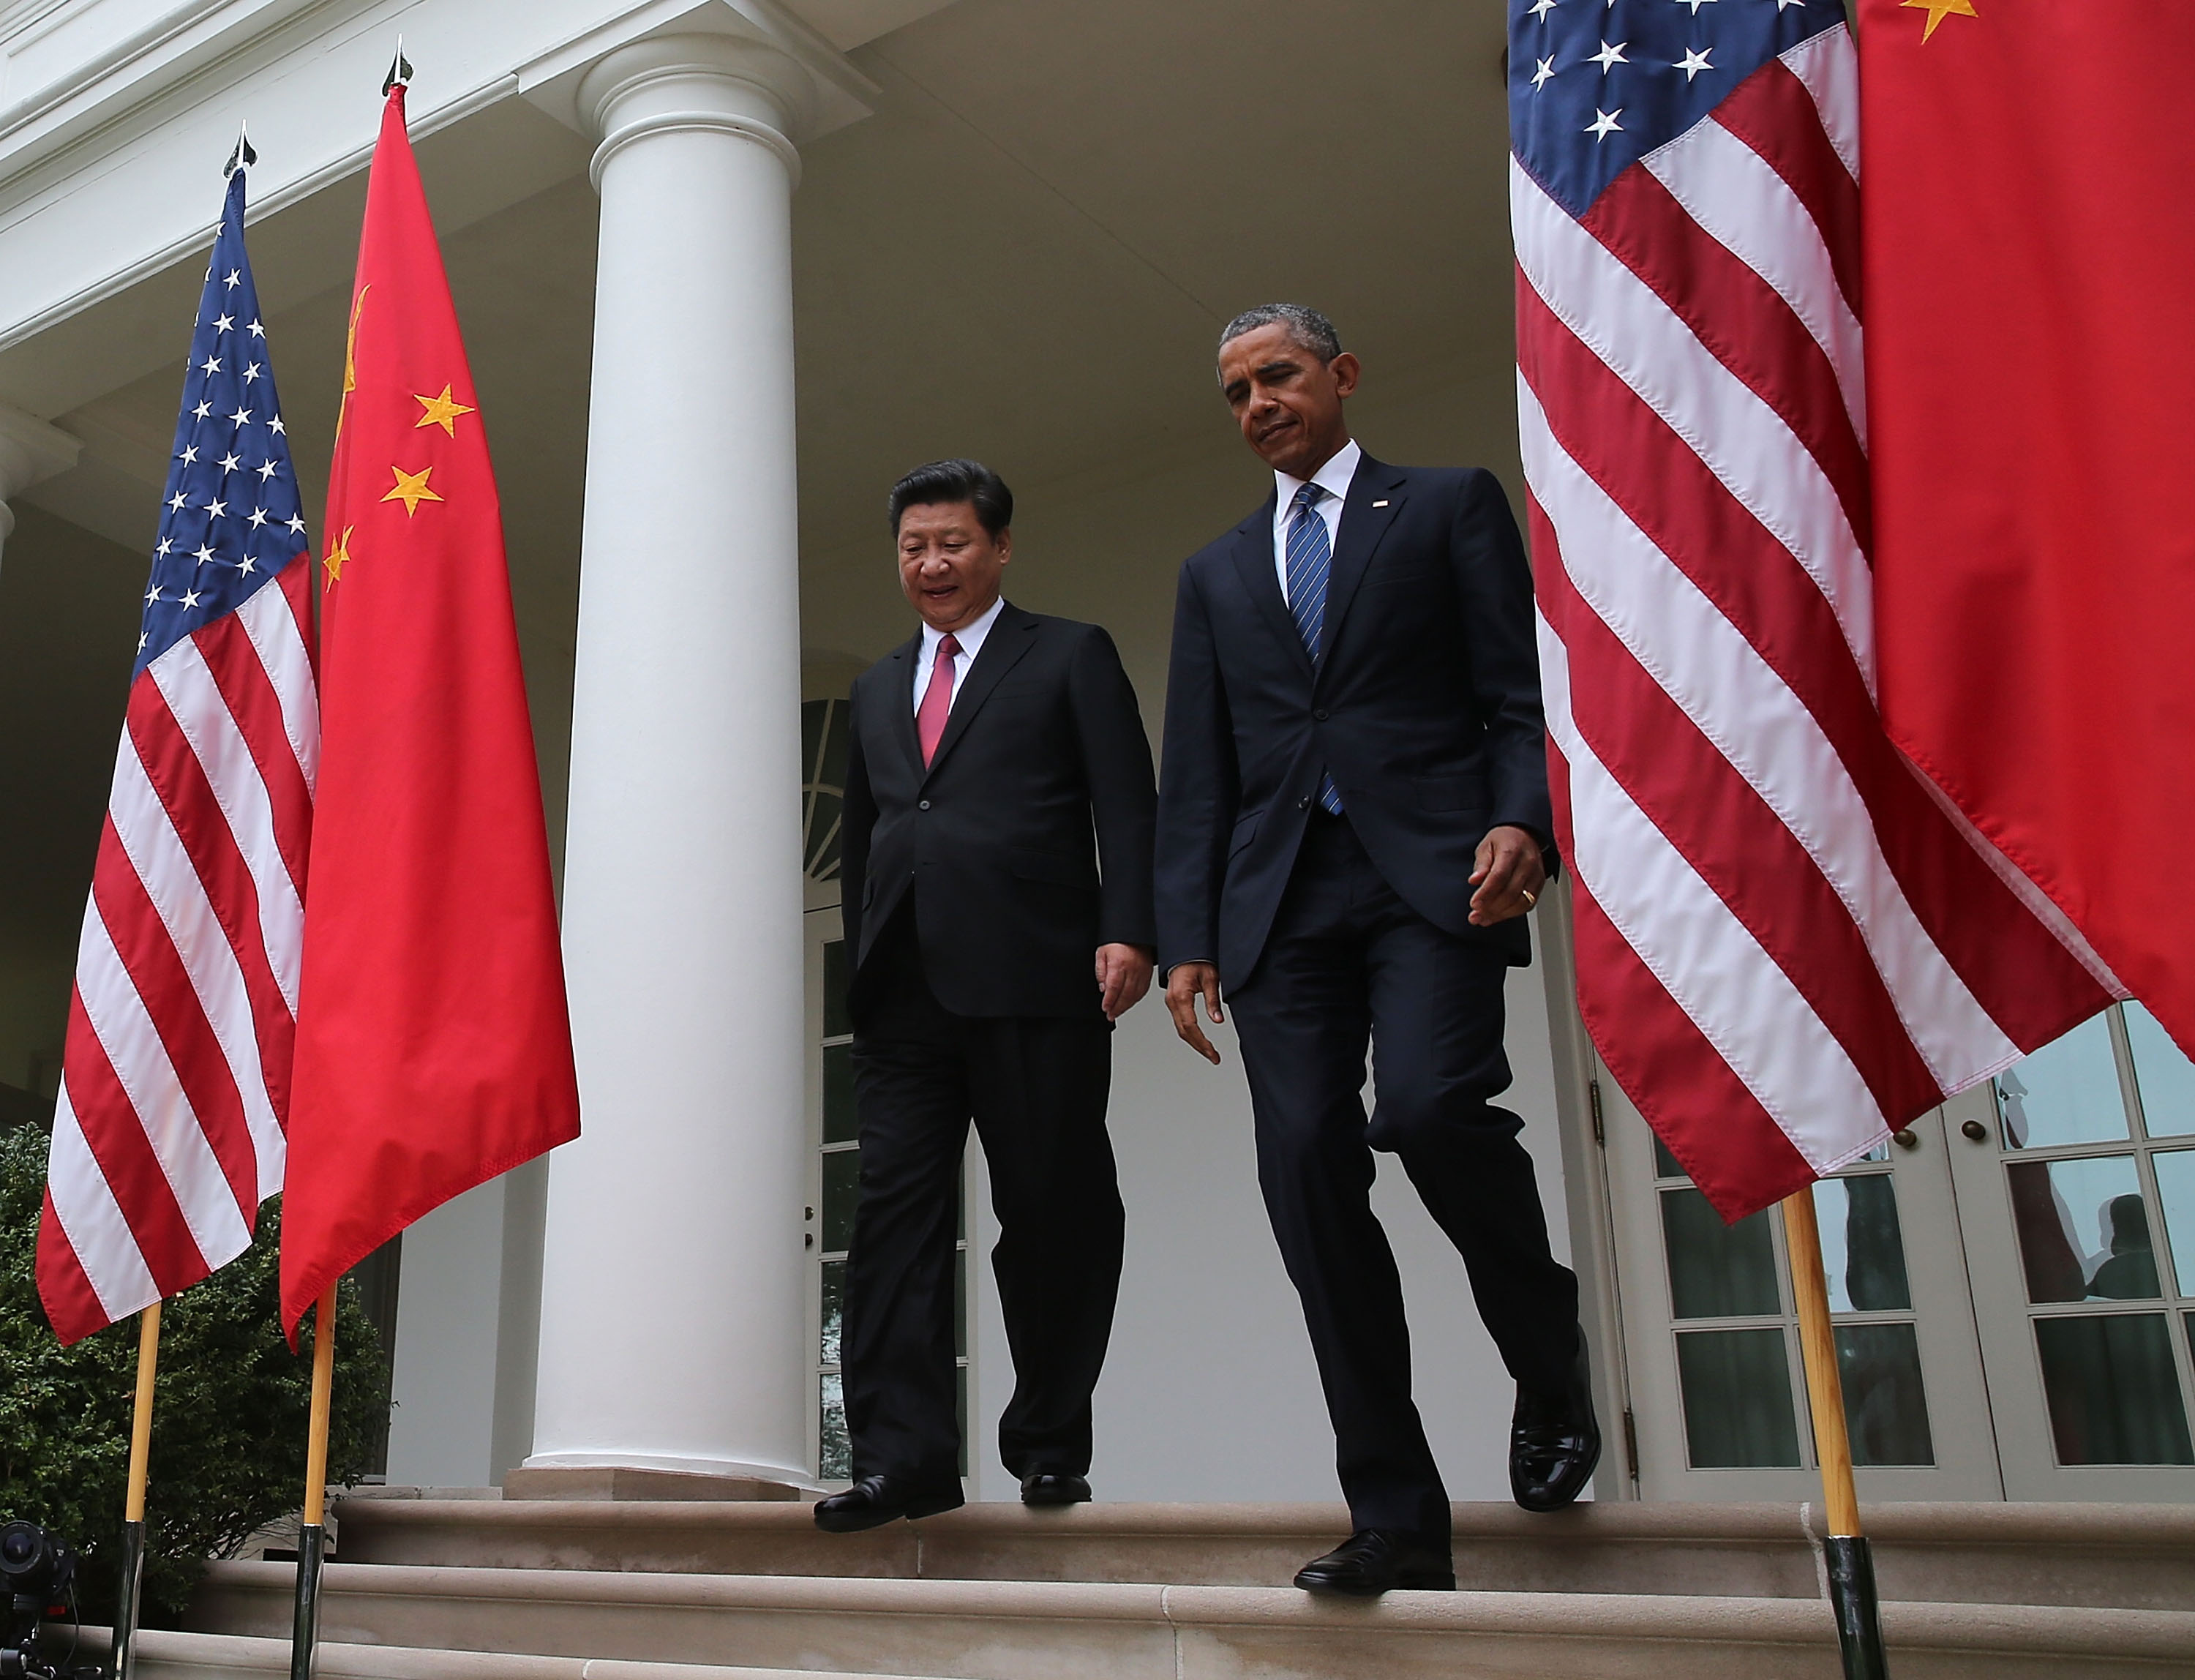 U.S. President Barack Obama (R) and Chinese President Xi Jinping walk arrive to a joint news conference at The White House on Sept. 25, 2015 in Washington, DC (Mark Wilson—Getty Images)